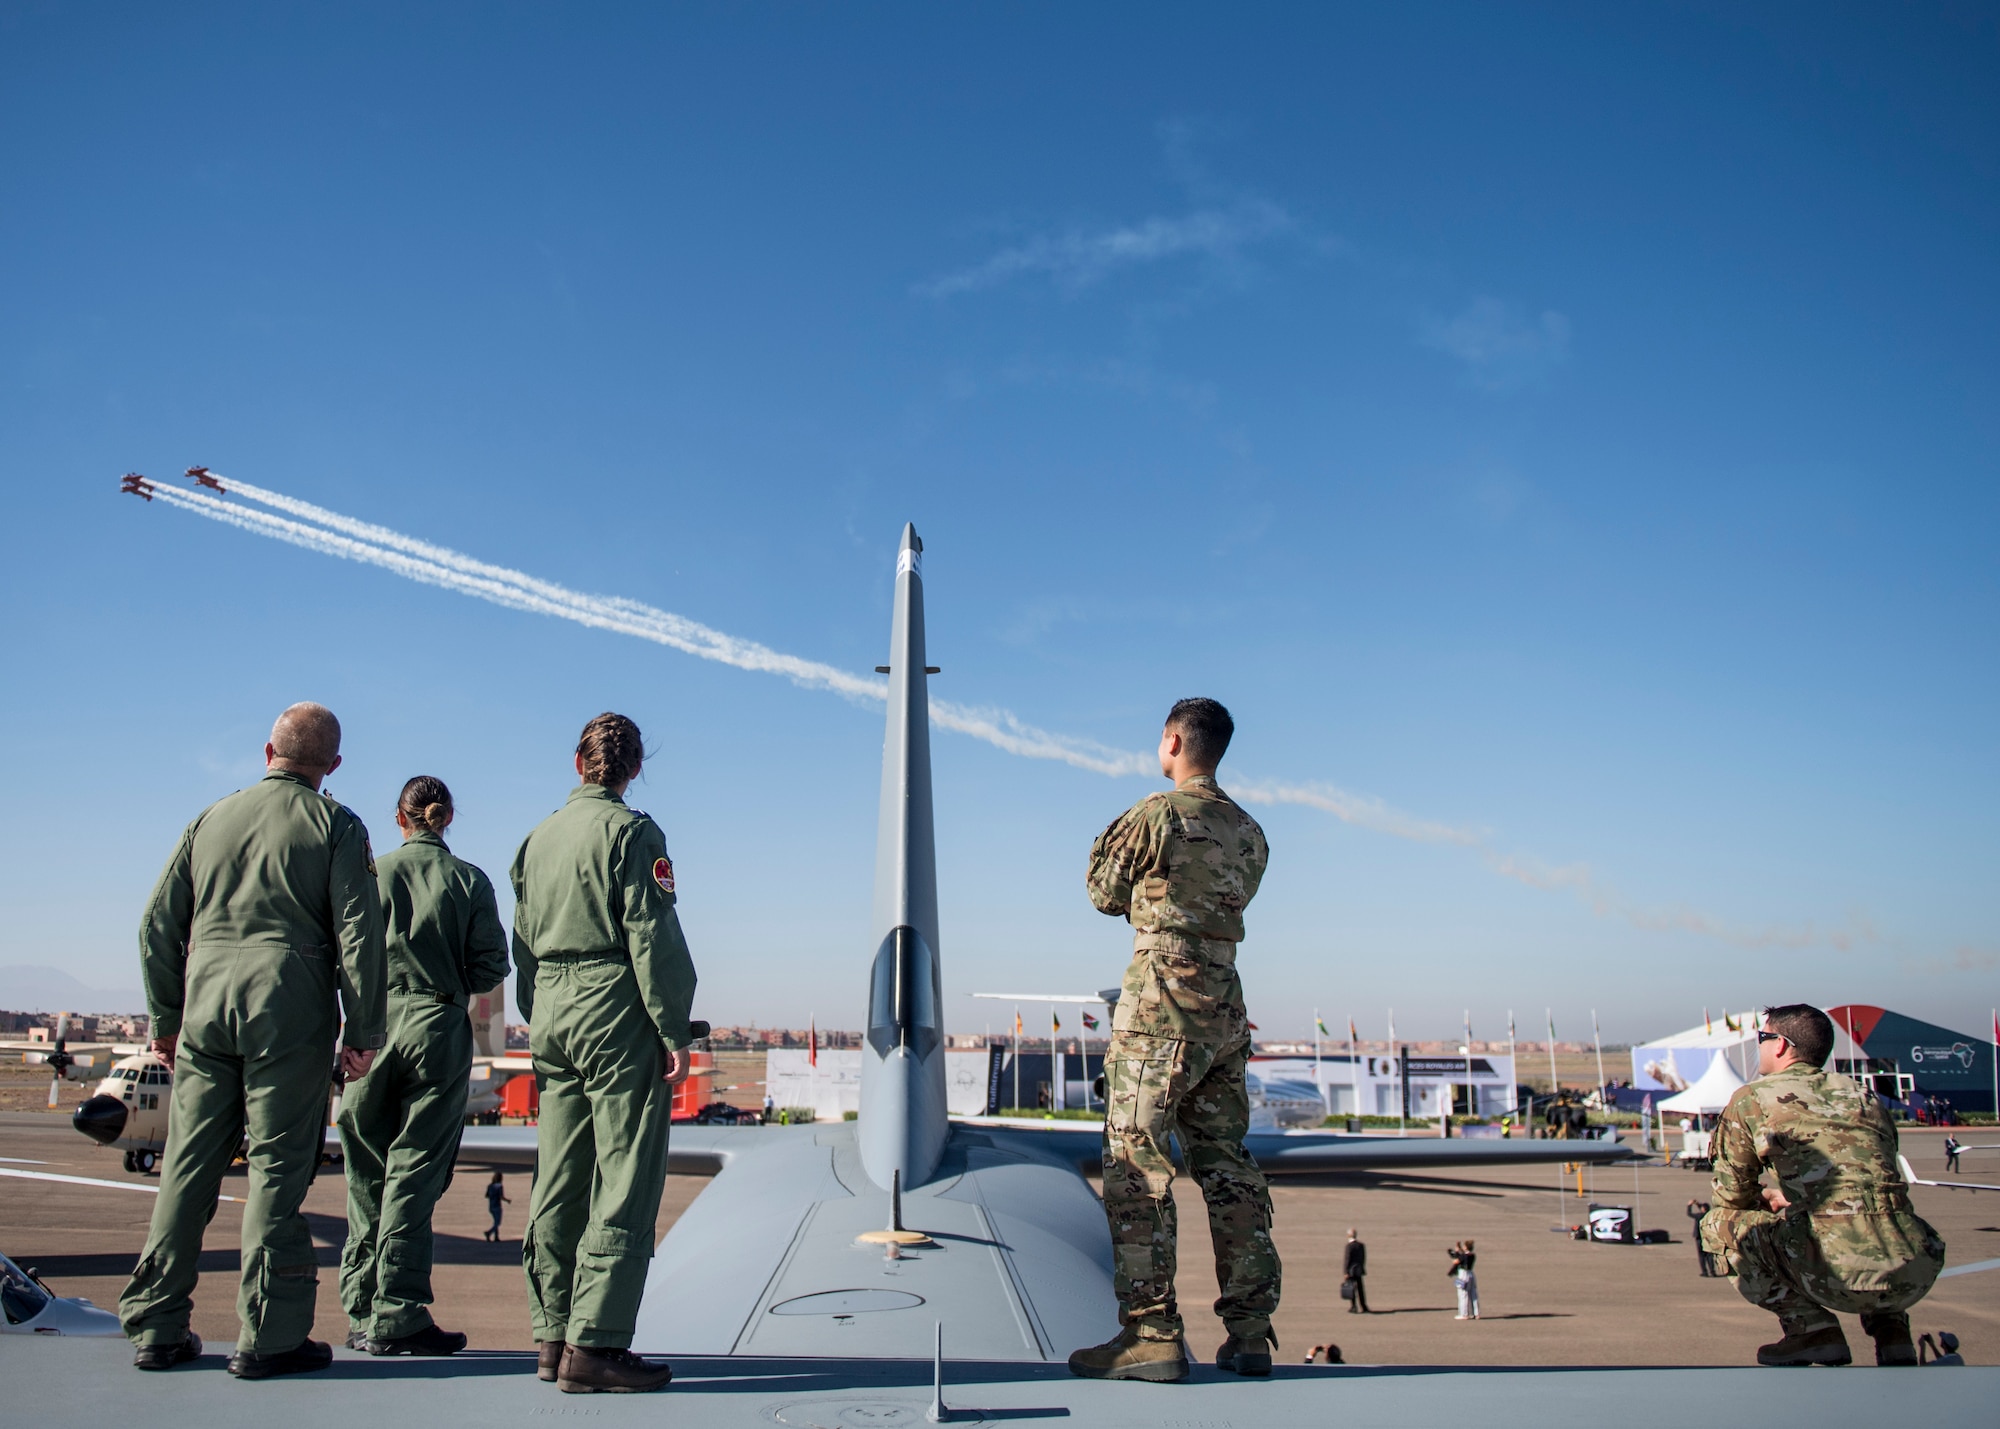 MARRAKECH, Morocco (Oct 24, 2018) U.S. Air Force and British Royal Air Force Airmen spectate the 2018 Marrakech Air Show while on top of a C-130 Hercules. The air show provides a unique opportunity for the U.S. along with other military partners to showcase leadership in aerospace technologies while supporting various armament procurement competitions taking place throughout Europe and Africa. (DoD photo by Mass Communication Specialist 2nd Class Cody Hendrix)